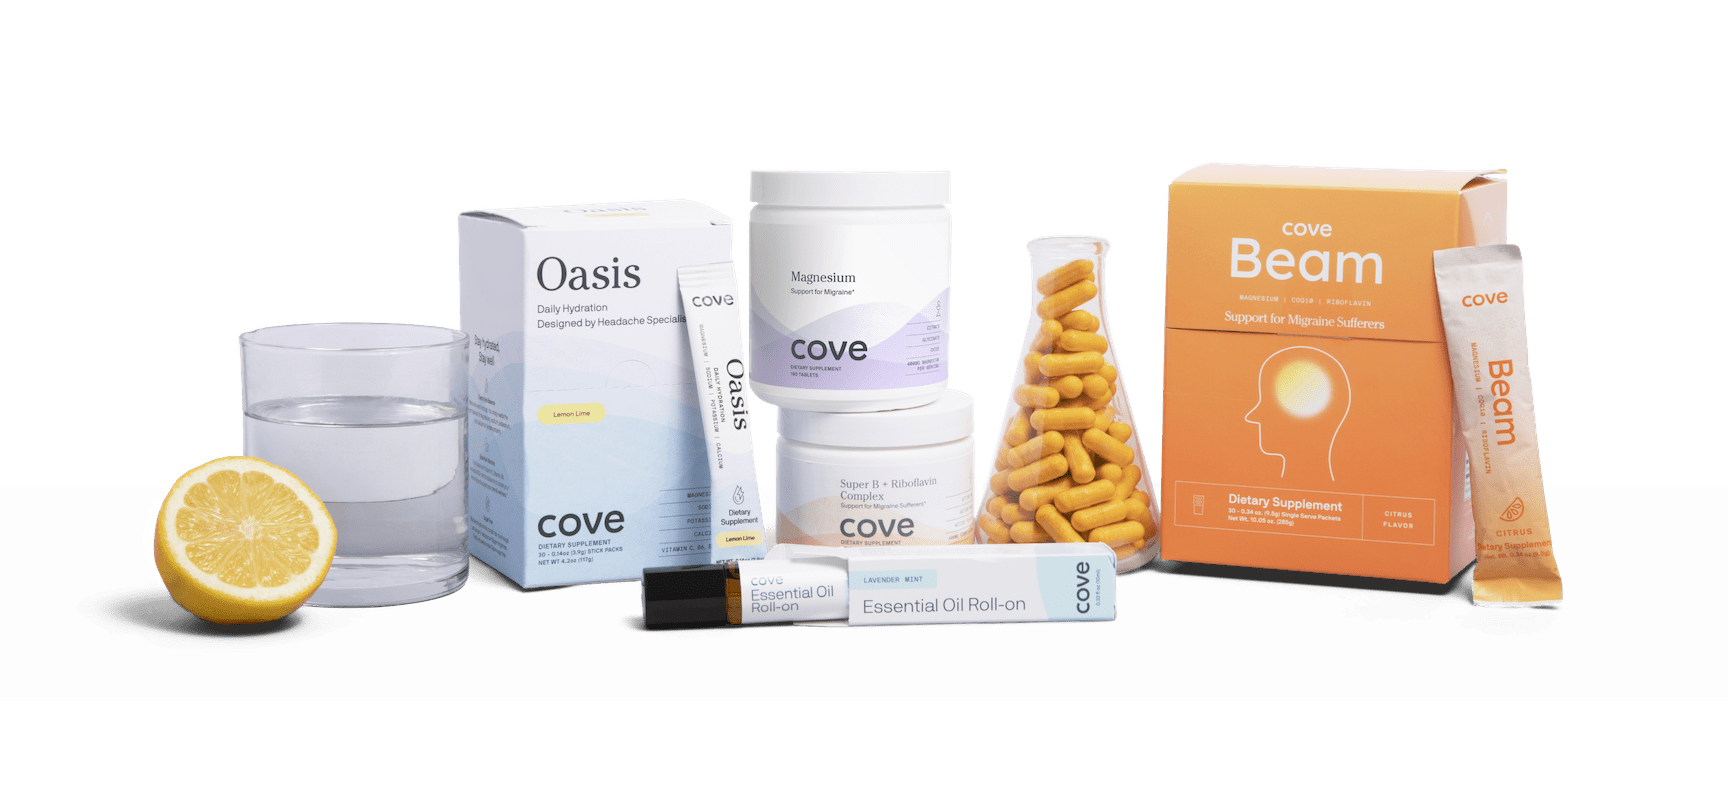 An image of Cove's wellness portfolio, showcasing a variety of supplements, essential oils, and vitamins designed to help you manage your migraine.